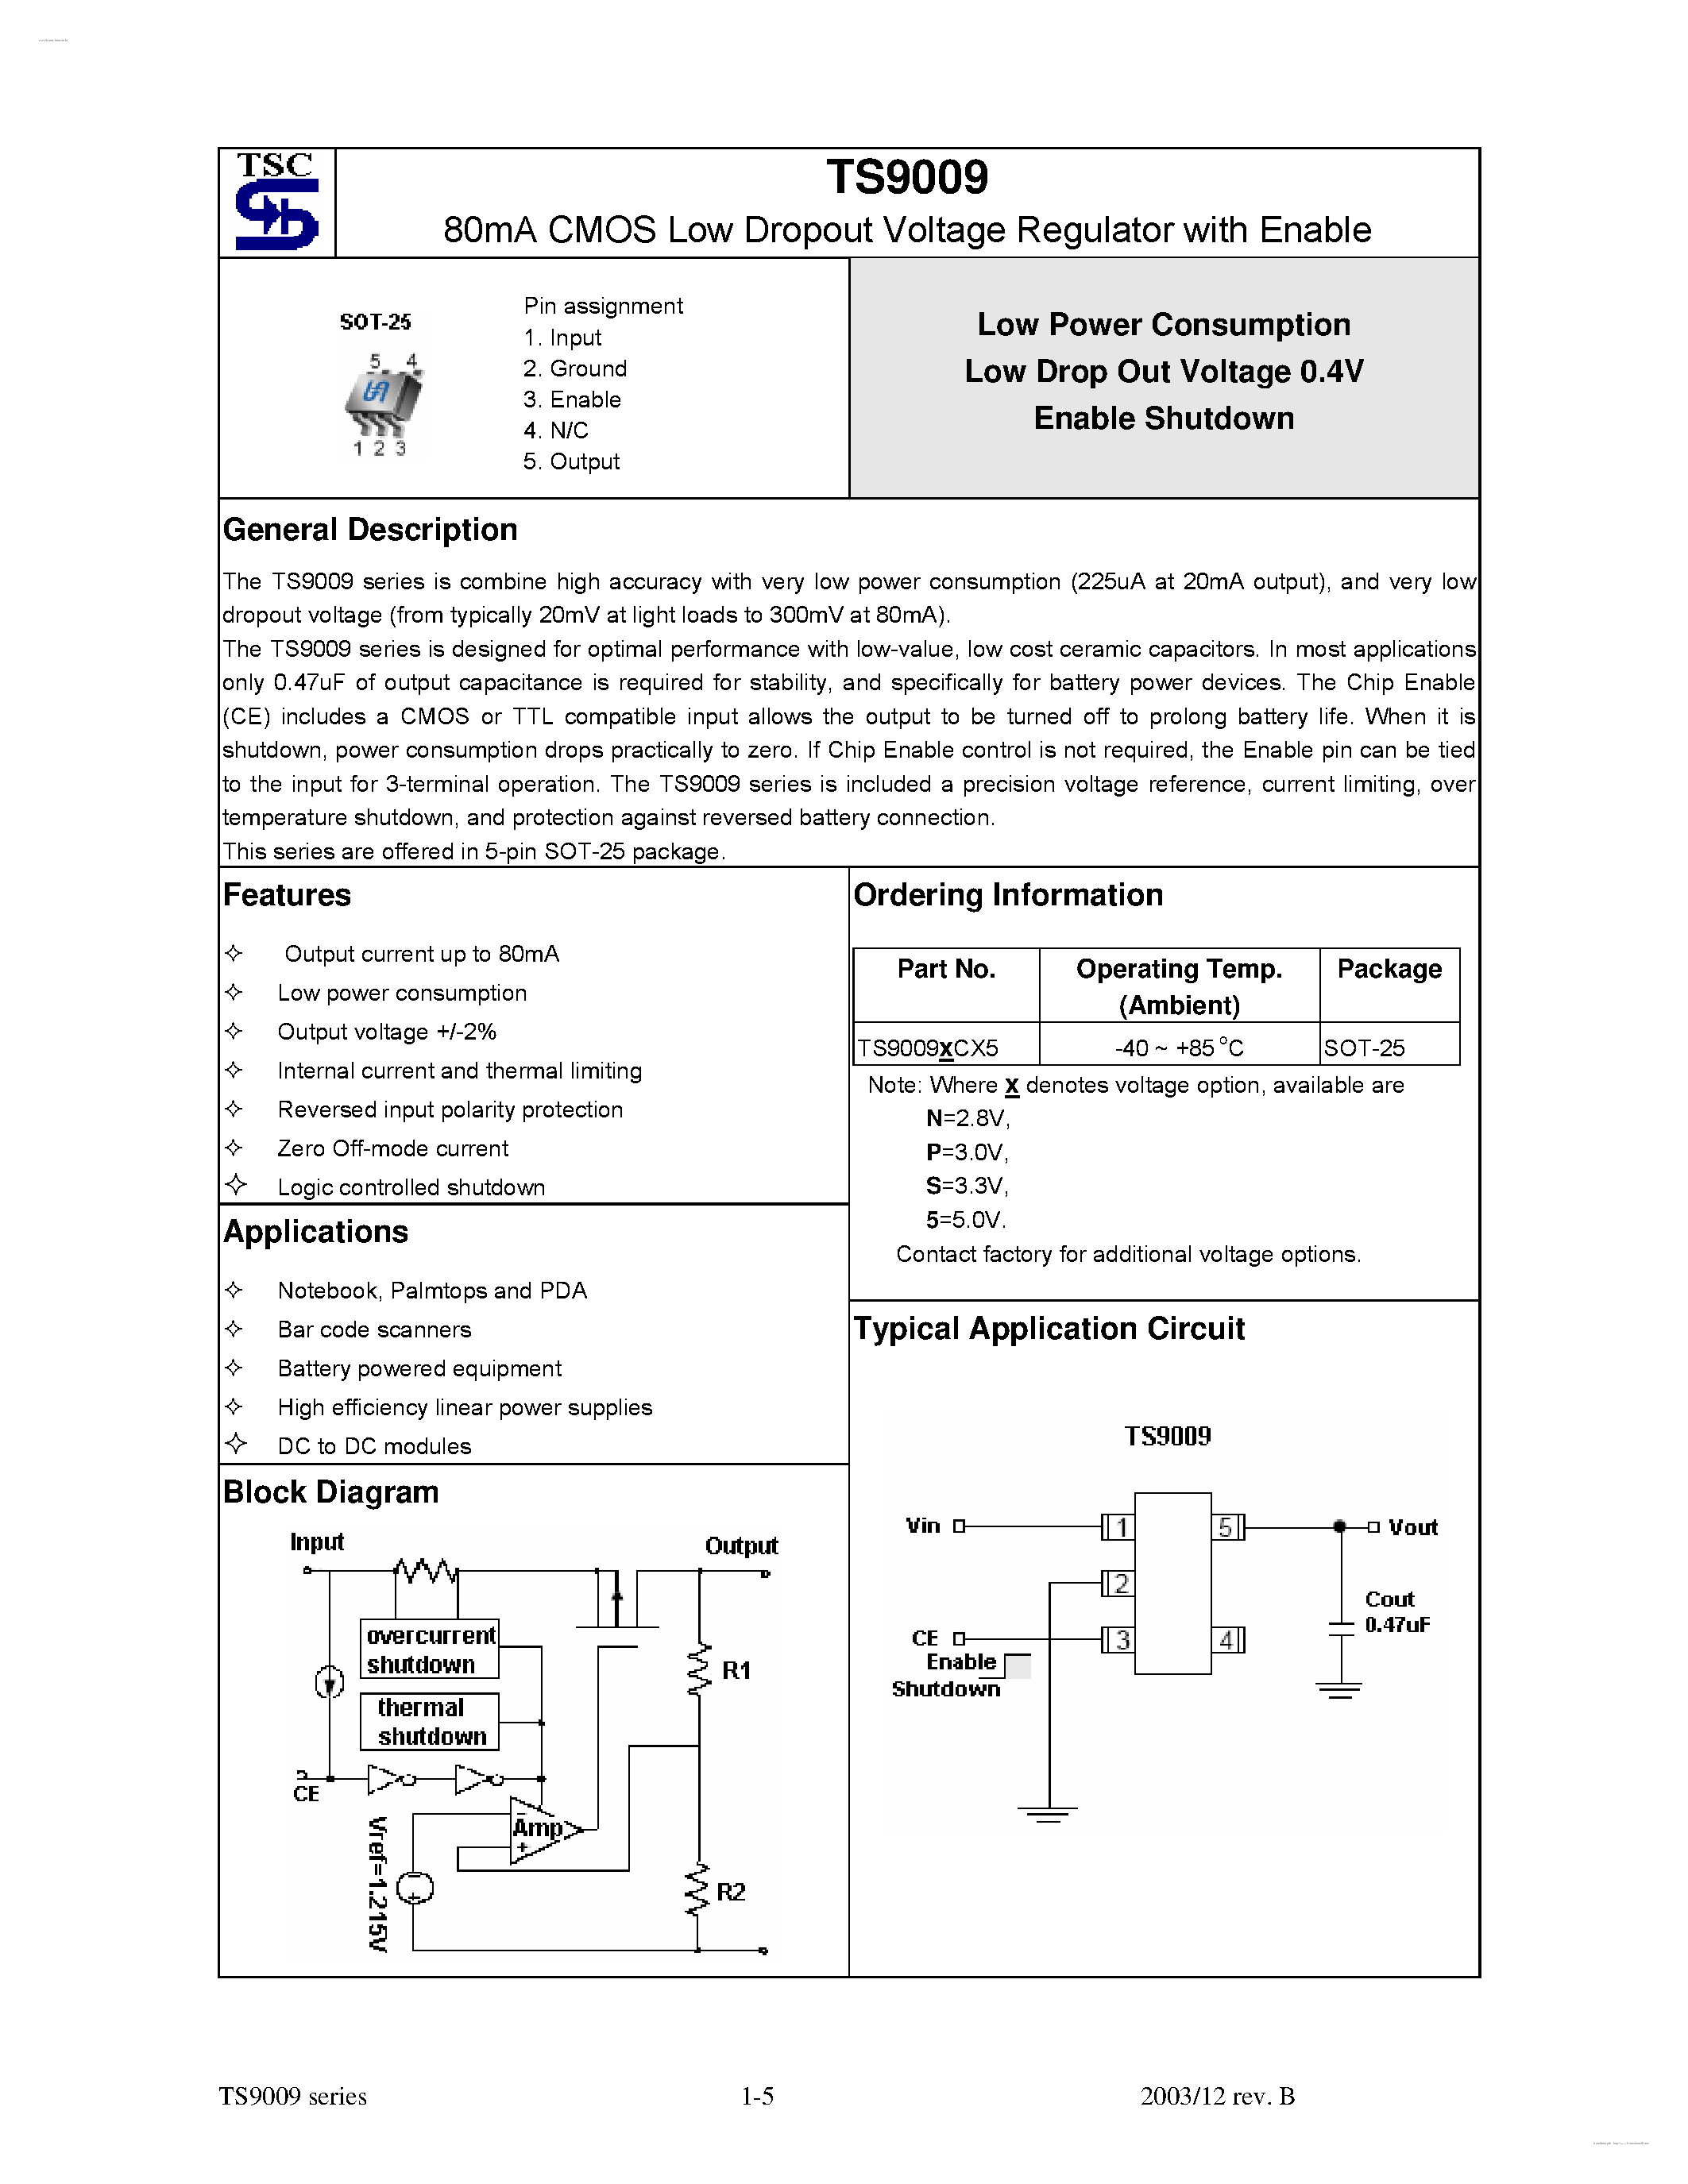 Datasheet TS9009 - 80mA CMOS Low Dropout Voltage Regulator page 1